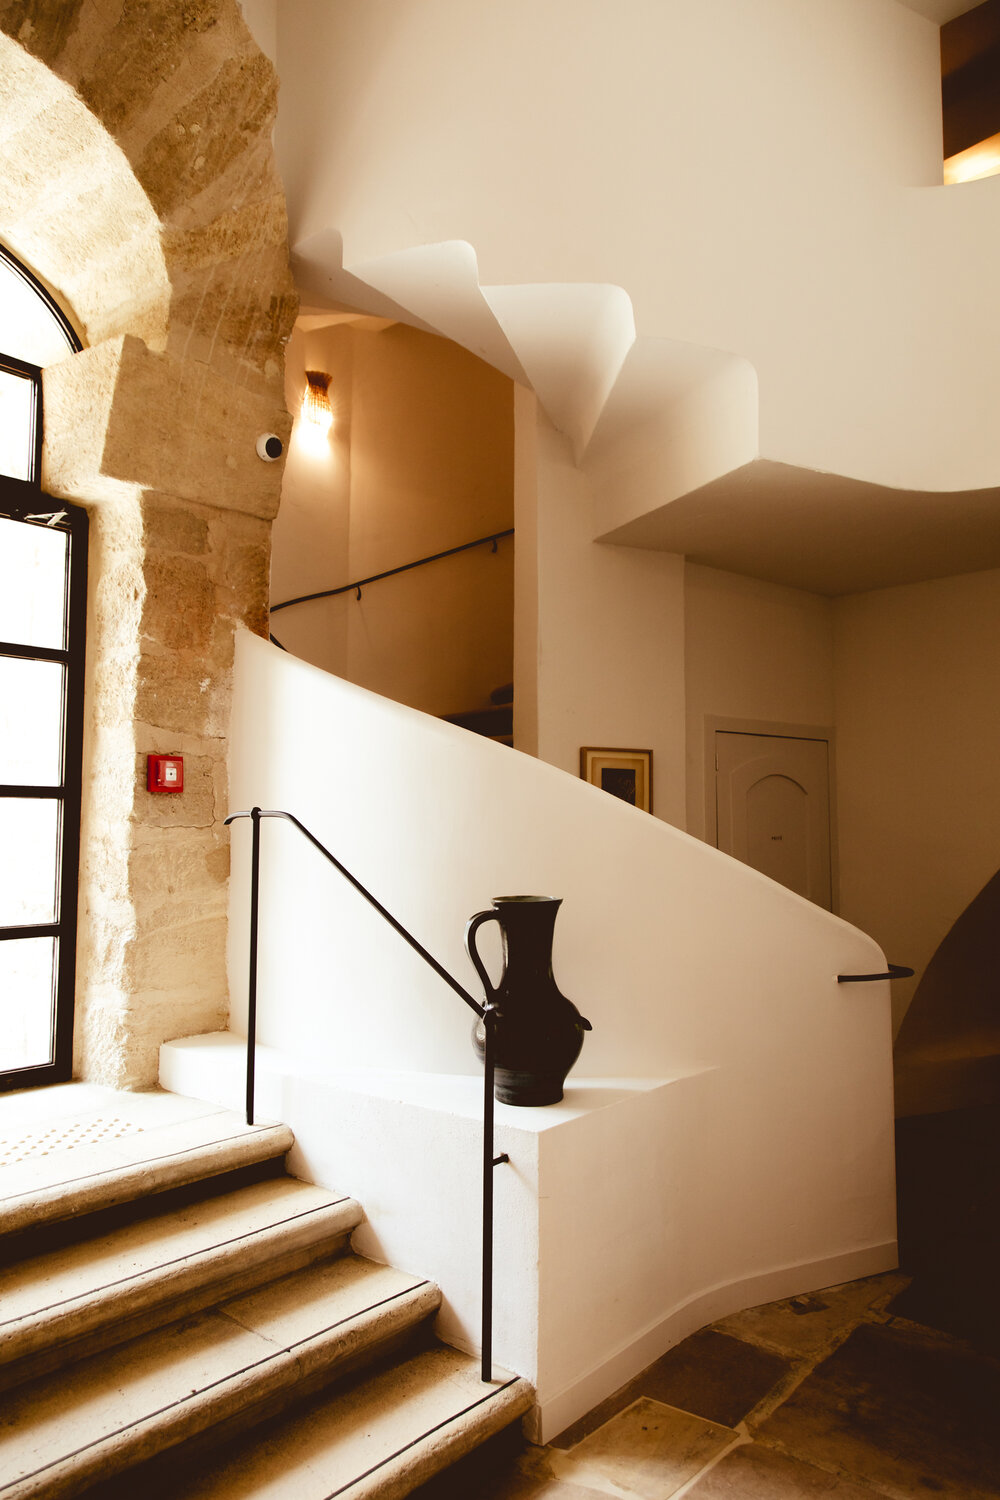 Le Moulin Lourmarin: A Boutique Hotel in the Heart of Provence